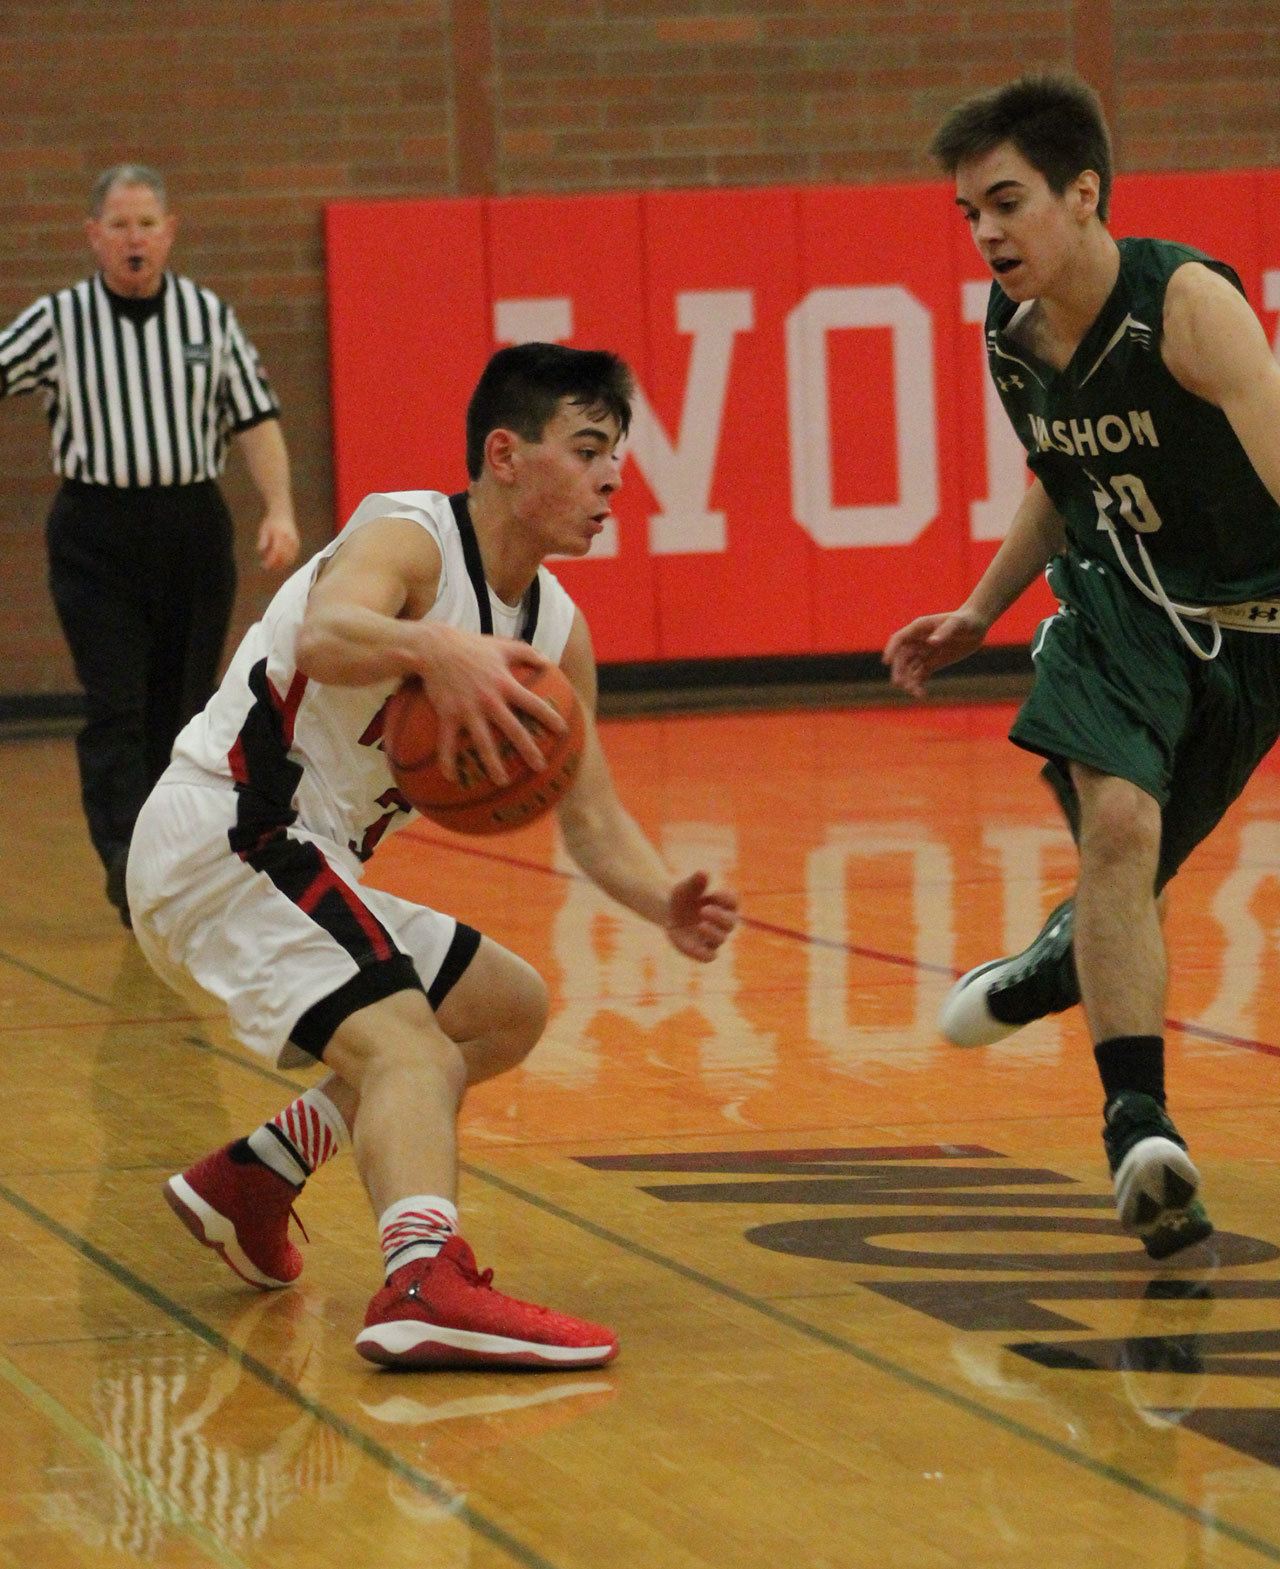 Hunter Smith uses a crossover dribble to try to get by Vashon Island’s Jacob Chavez. (Photo by Jim Waller)